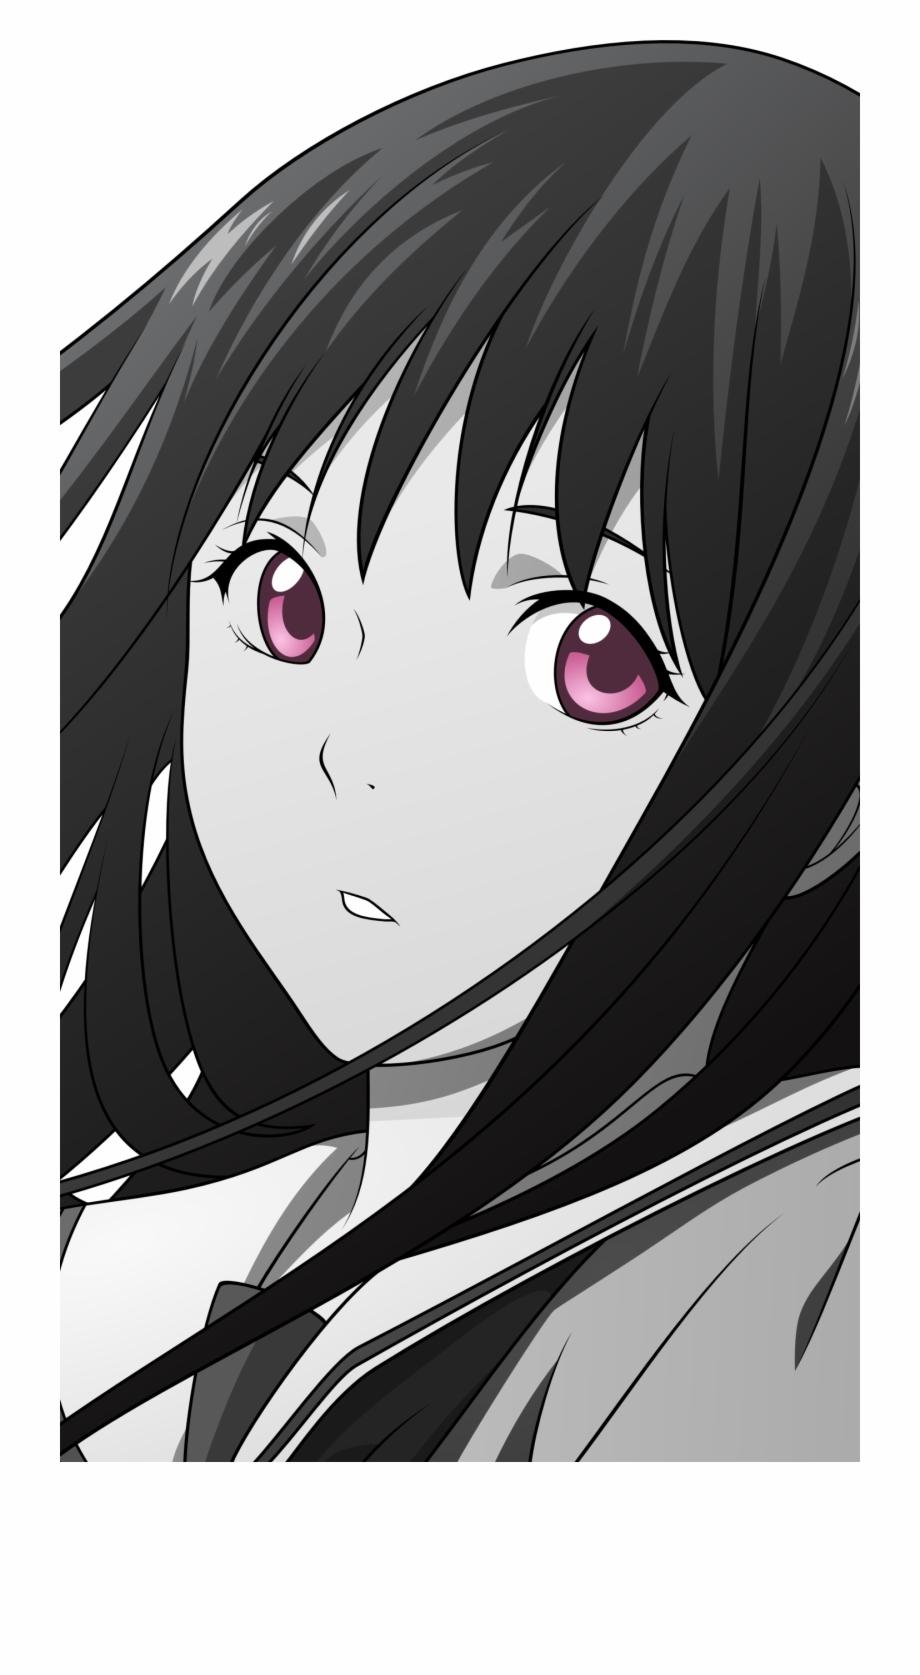 Free Anime Black And White Wallpaper, Download Free Clip Art, Free